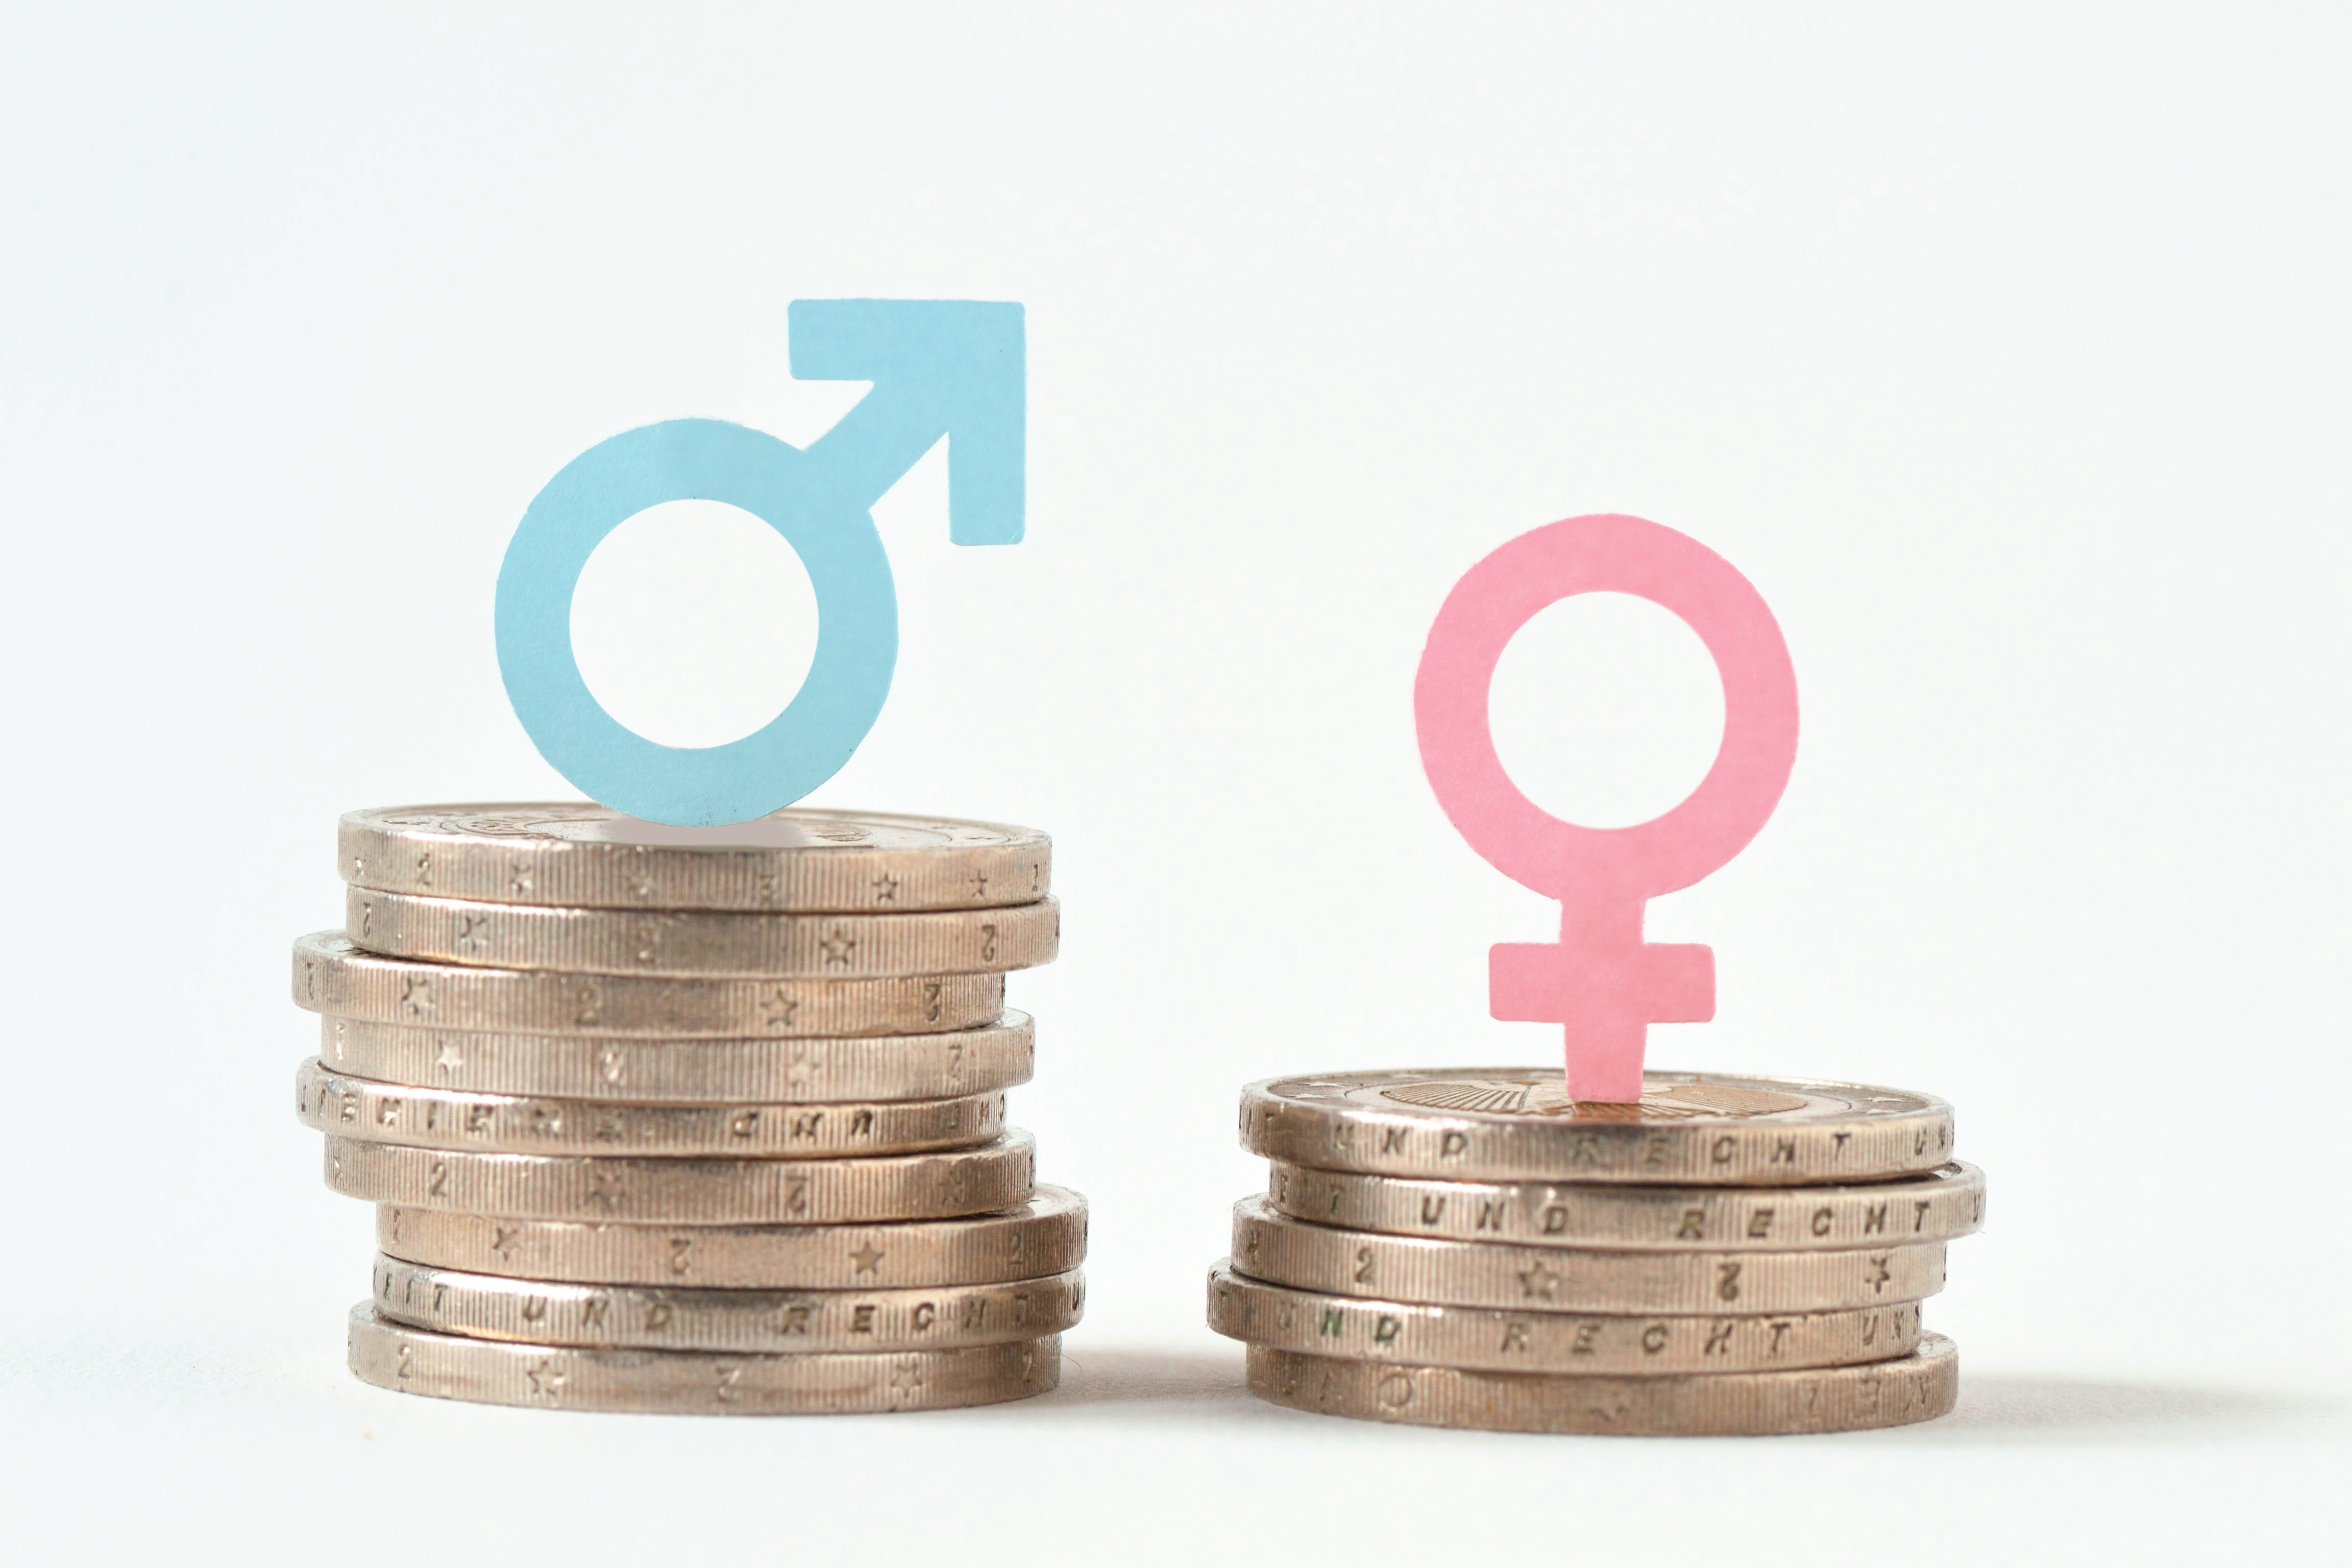 Male and female symbols on piles of coins - Gender pay equality concept